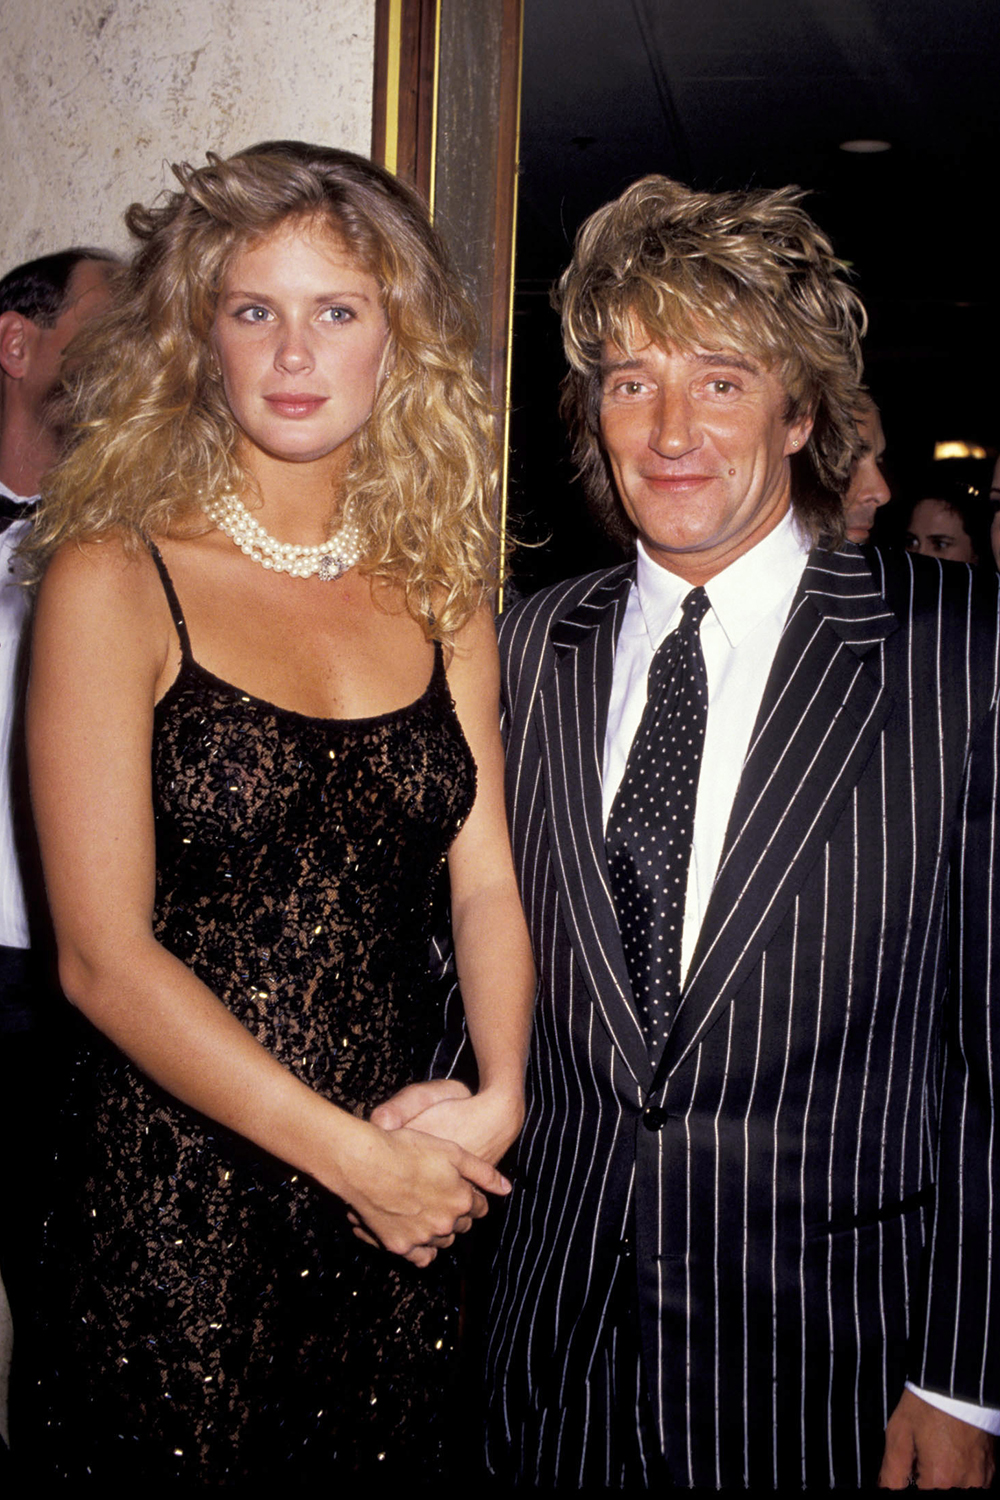 Rod Stewart married Kiwi model Rachel Hunter in 1990. The couple divorced in 2006 and have two children Renee and Liam.